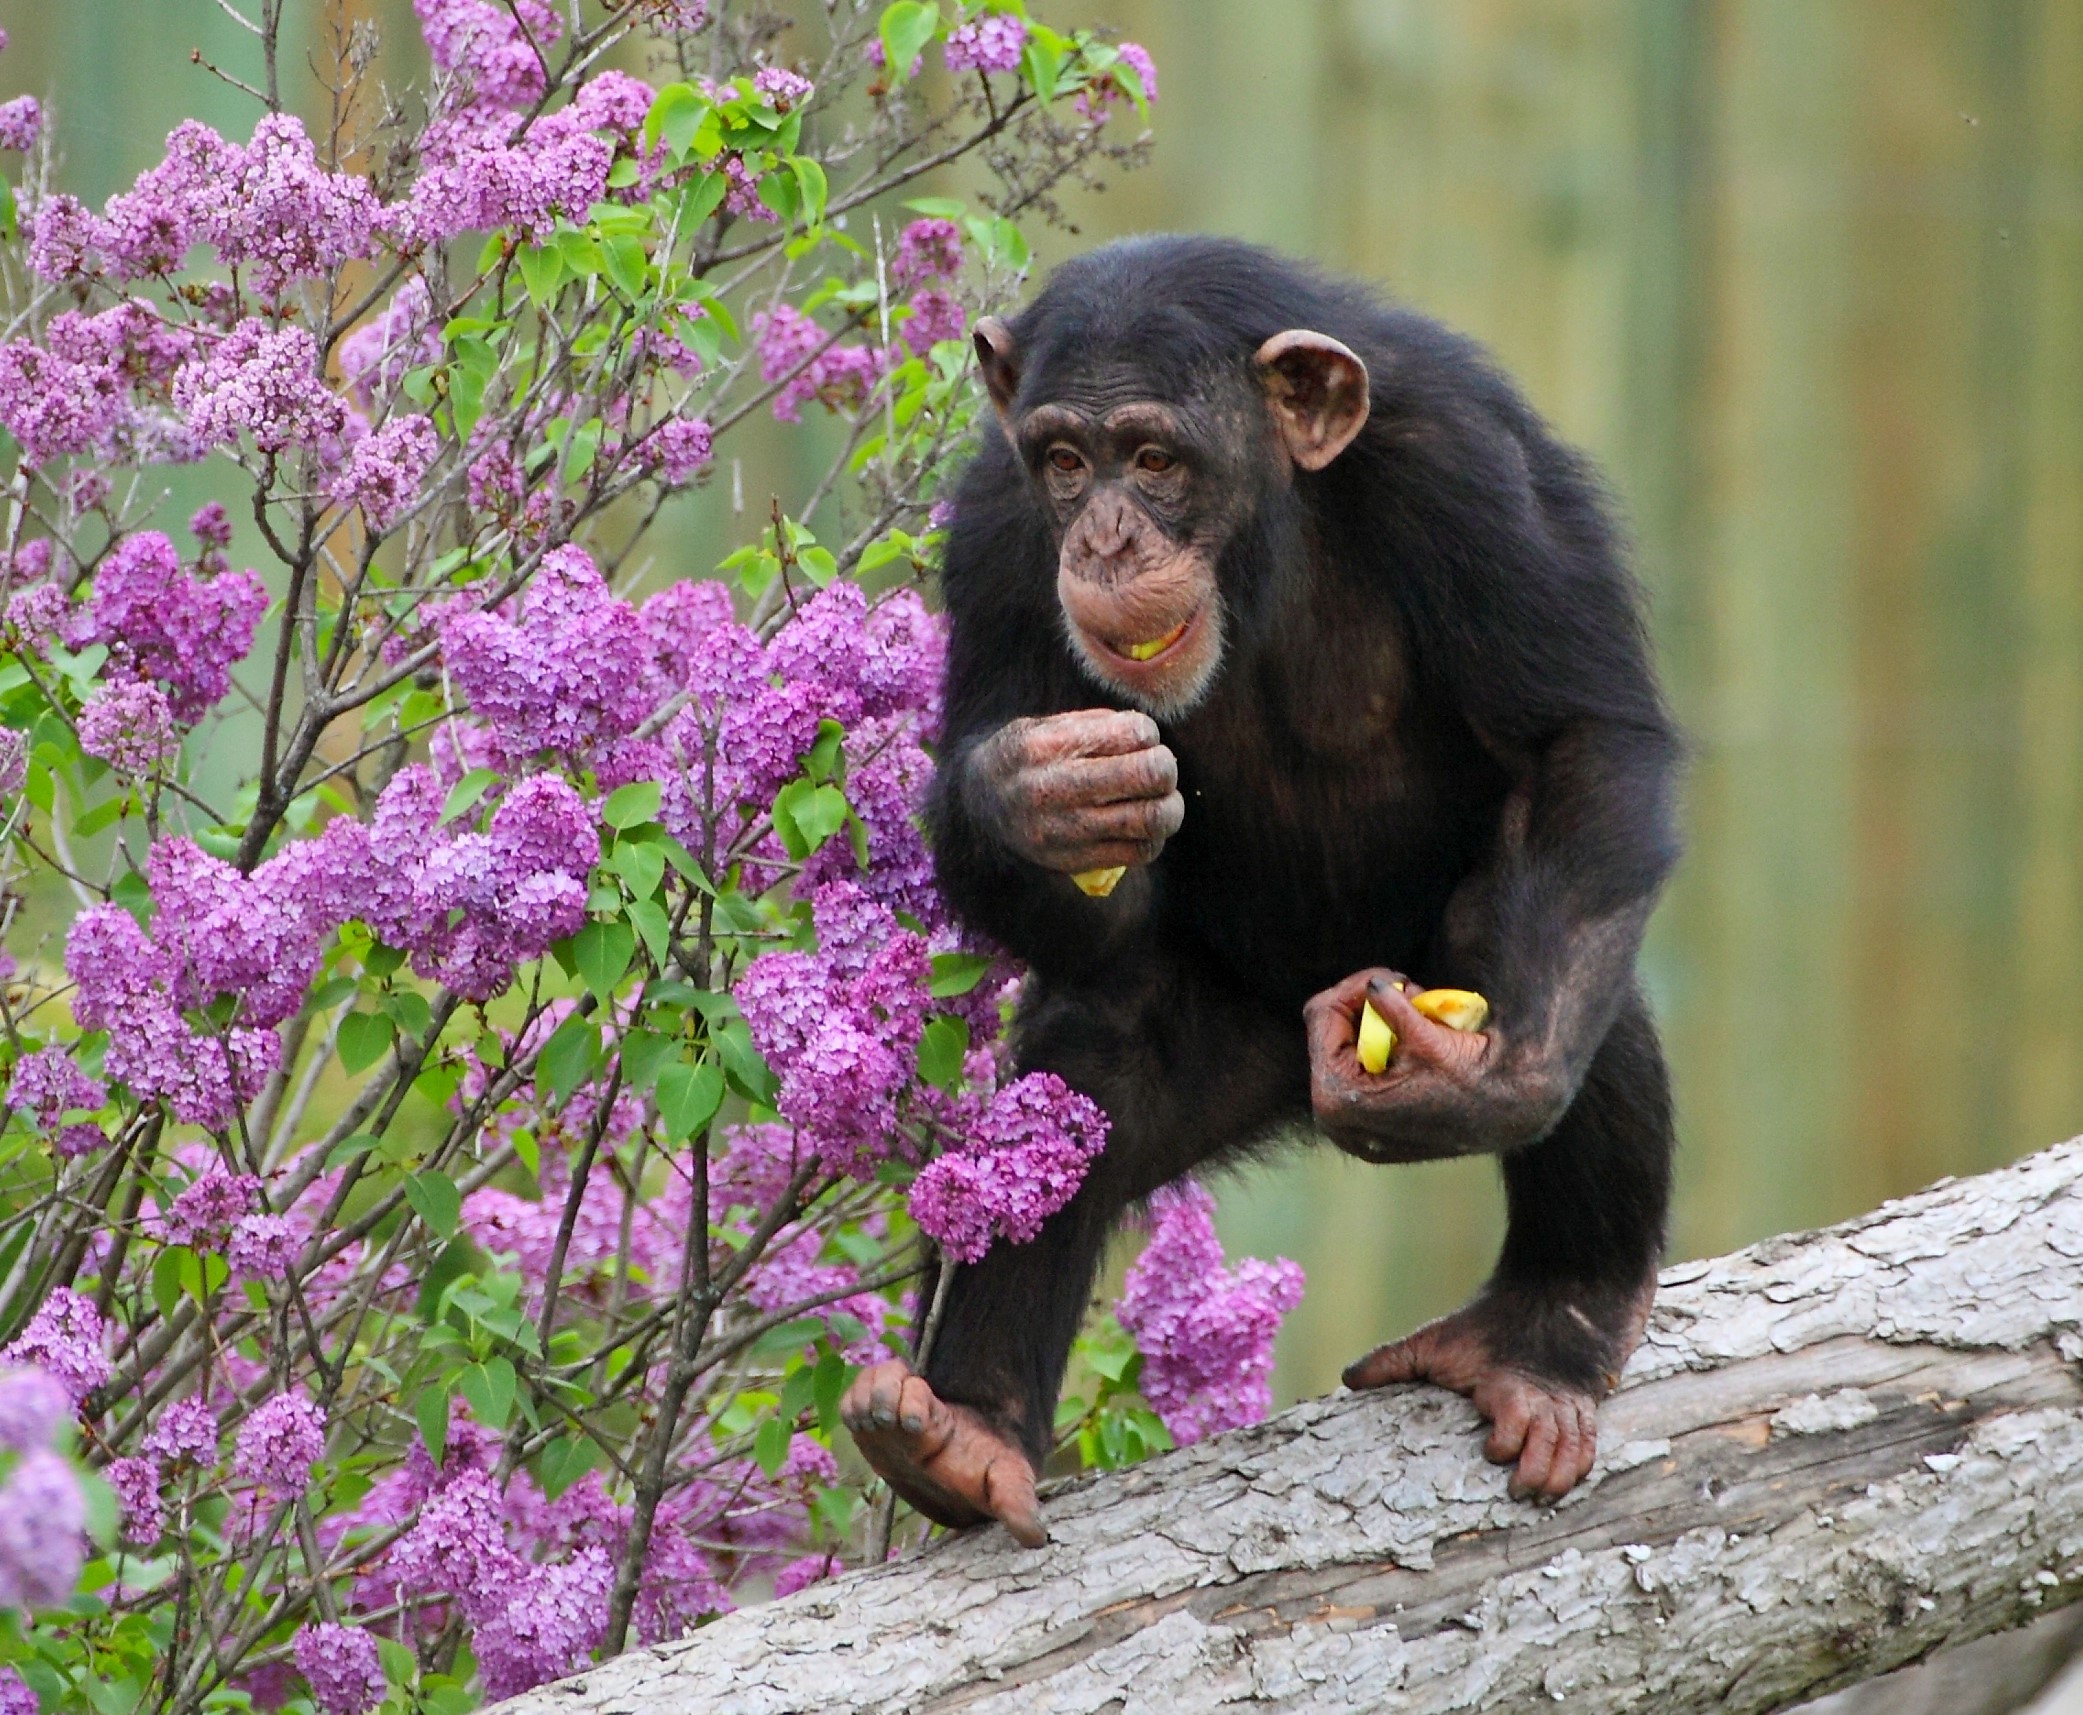 Great apes' heel-down posture helps support their body weight as they stand, walk and run.